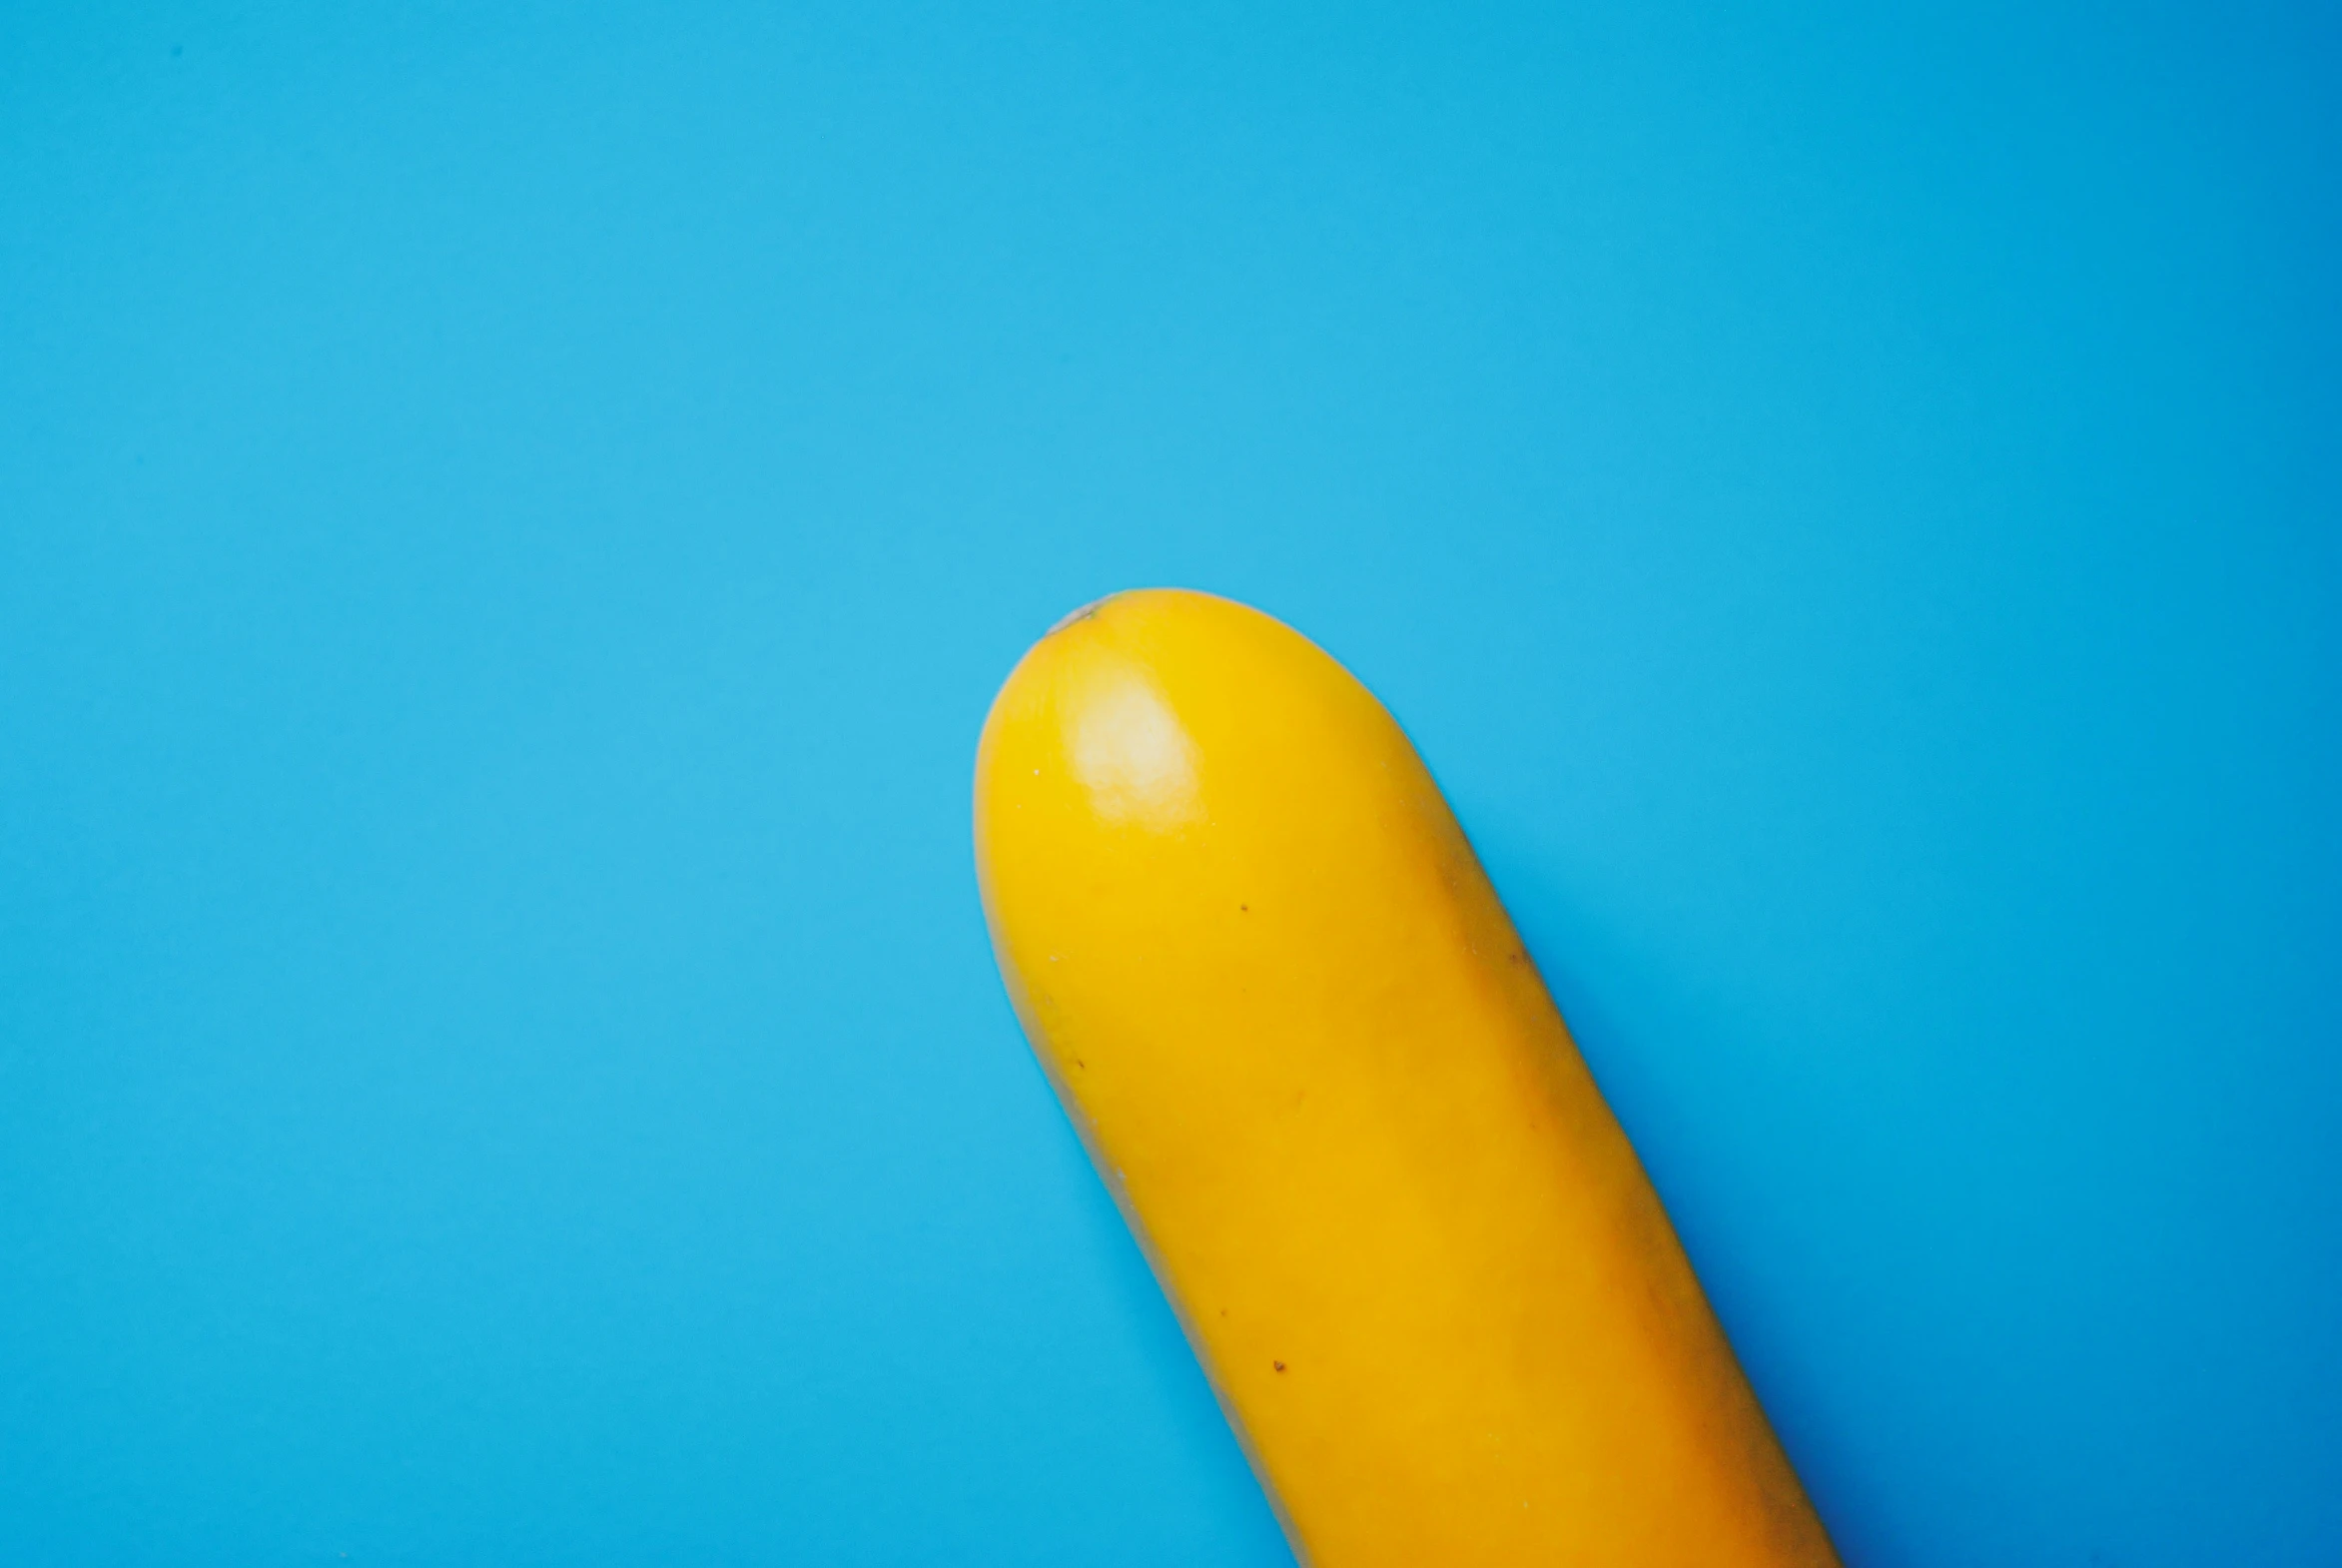 a yellow object is posed on a blue background